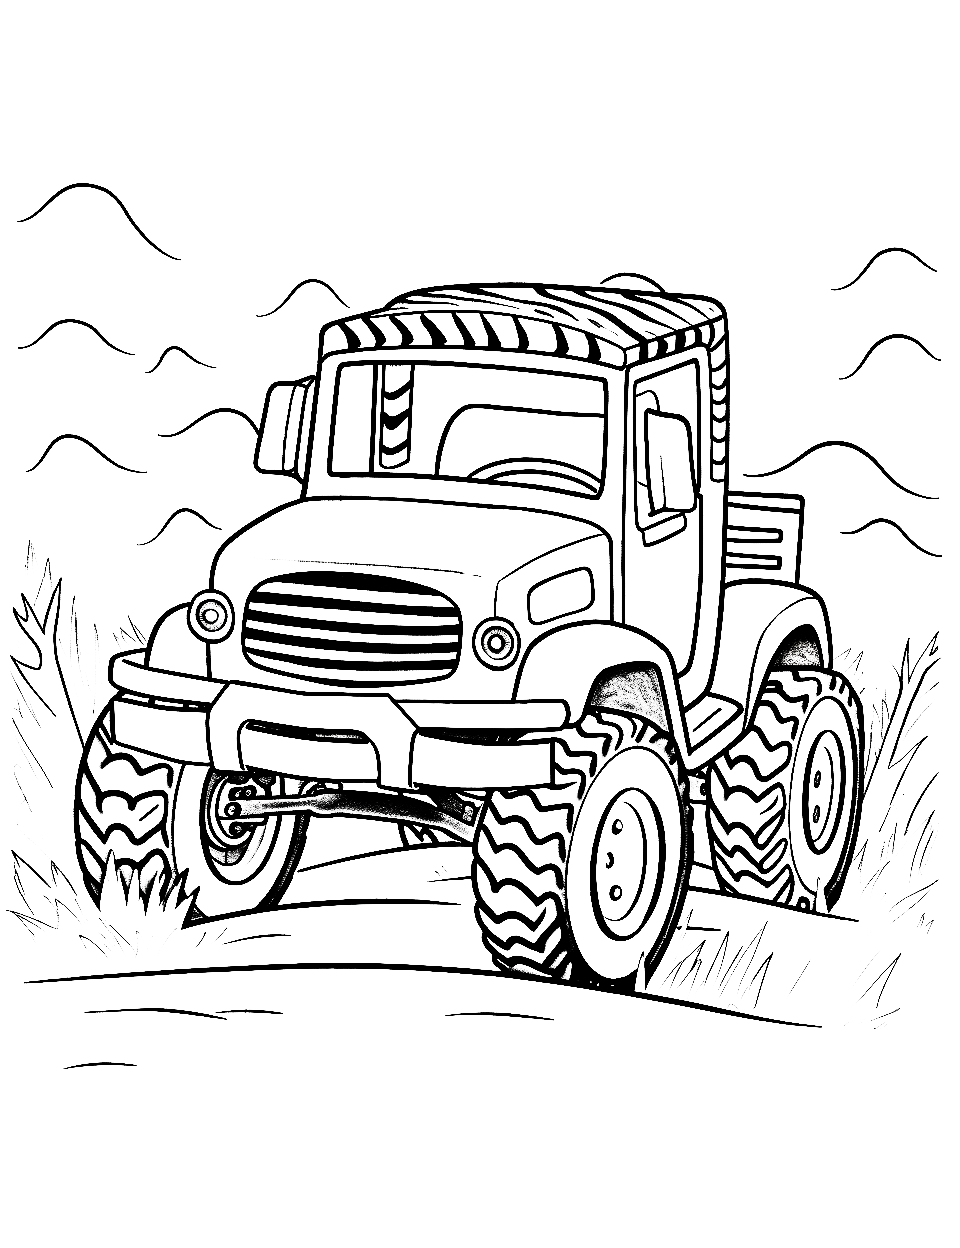 Zebra's Savanna Zoom Monster Truck Coloring Page - A zebra-striped monster truck racing in the wild.